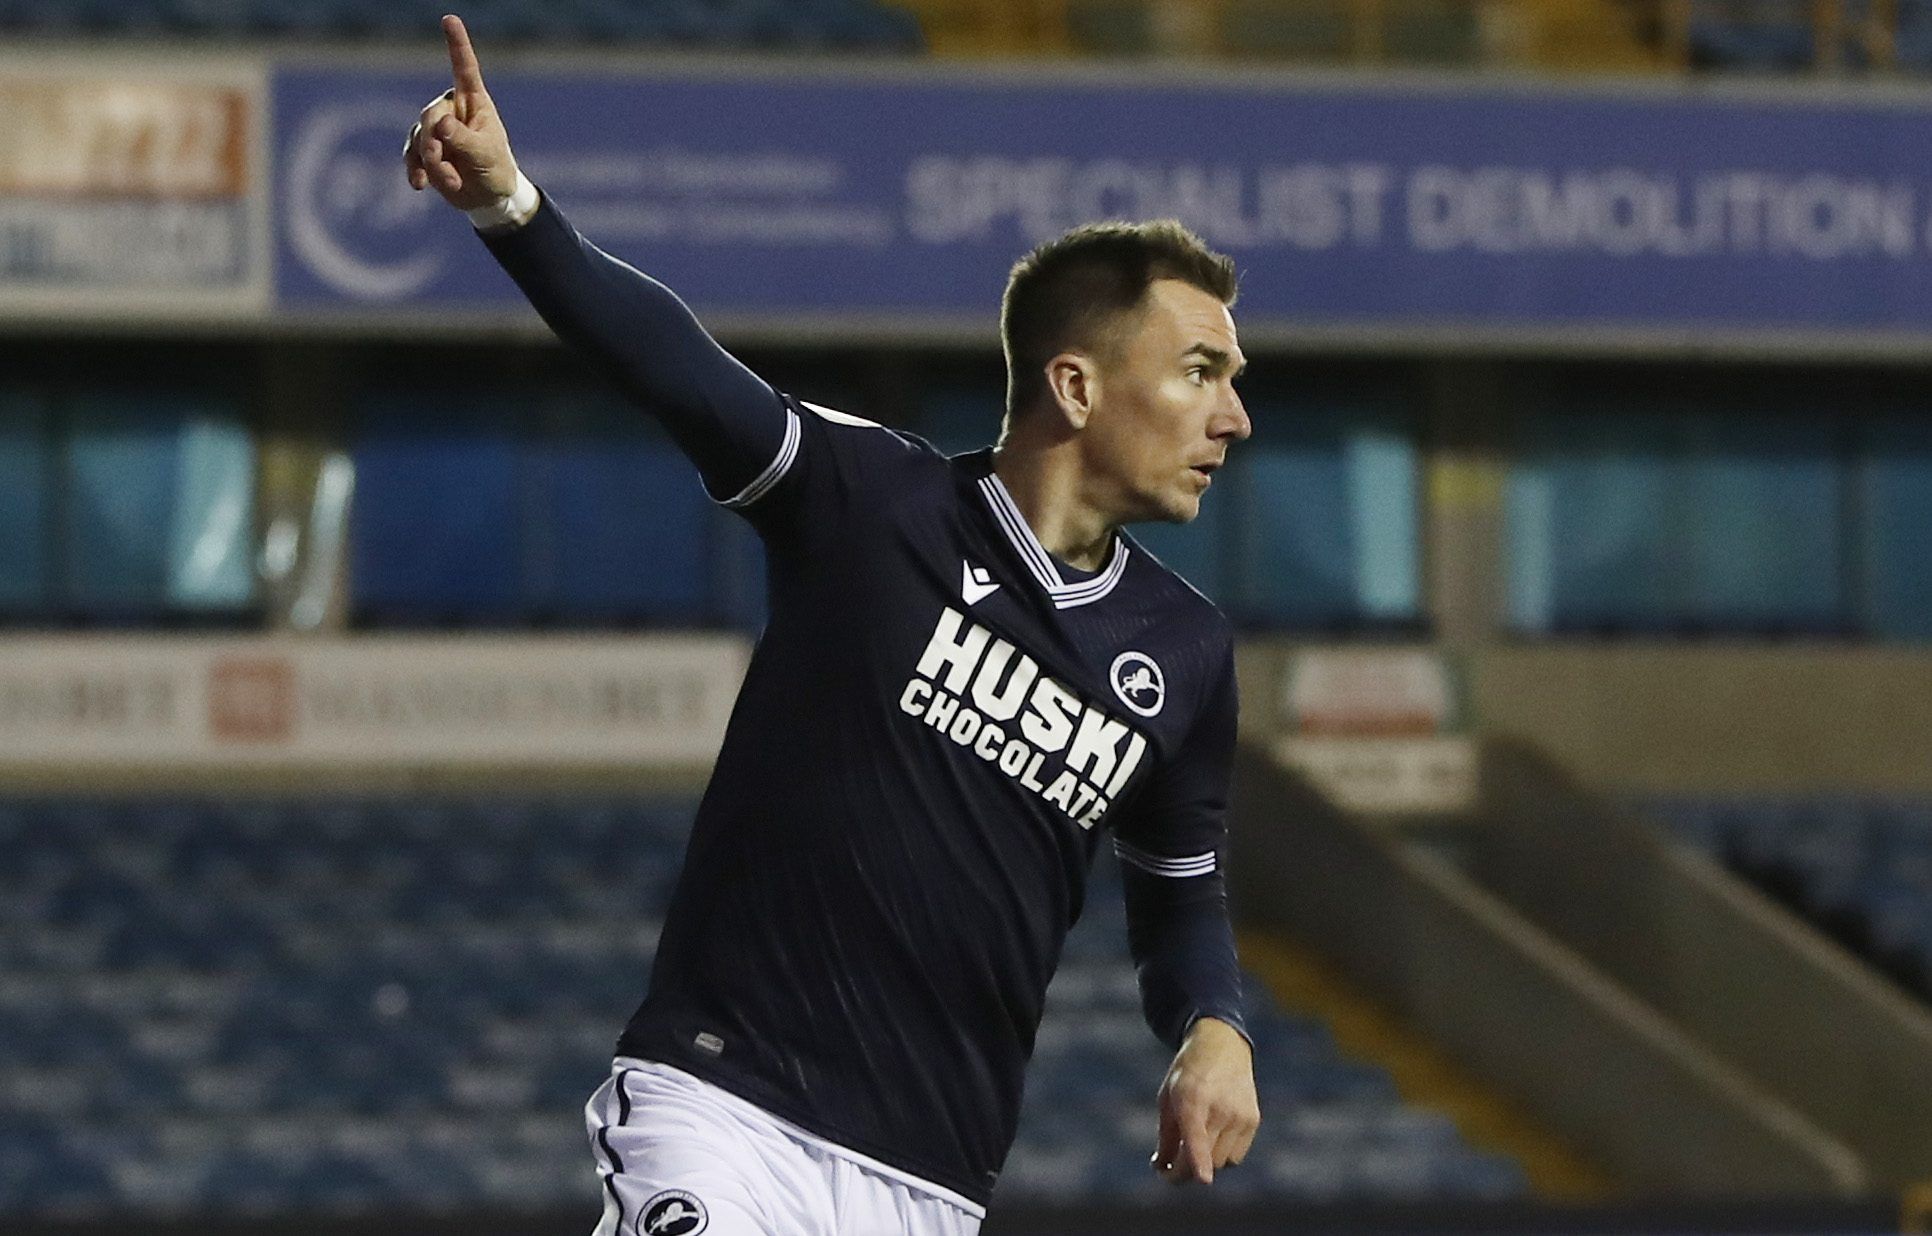 jed-wallace-millwall-transfer-west-brom-transfer-news-wallace-steve-bruce-ismael-besiktas-transfer-summer-signingsSoccer Football - Championship - Millwall v Birmingham City - The Den, London, Britain - February 17, 2021 Millwall's Jed Wallace celebrates scoring their first goal Action Images/Paul Childs EDITORIAL USE ONLY. No use with unauthorized audio, video, data, fixture lists, club/league logos or 'live' services. Online in-match use limited to 75 images, no video emulation. No use in bett